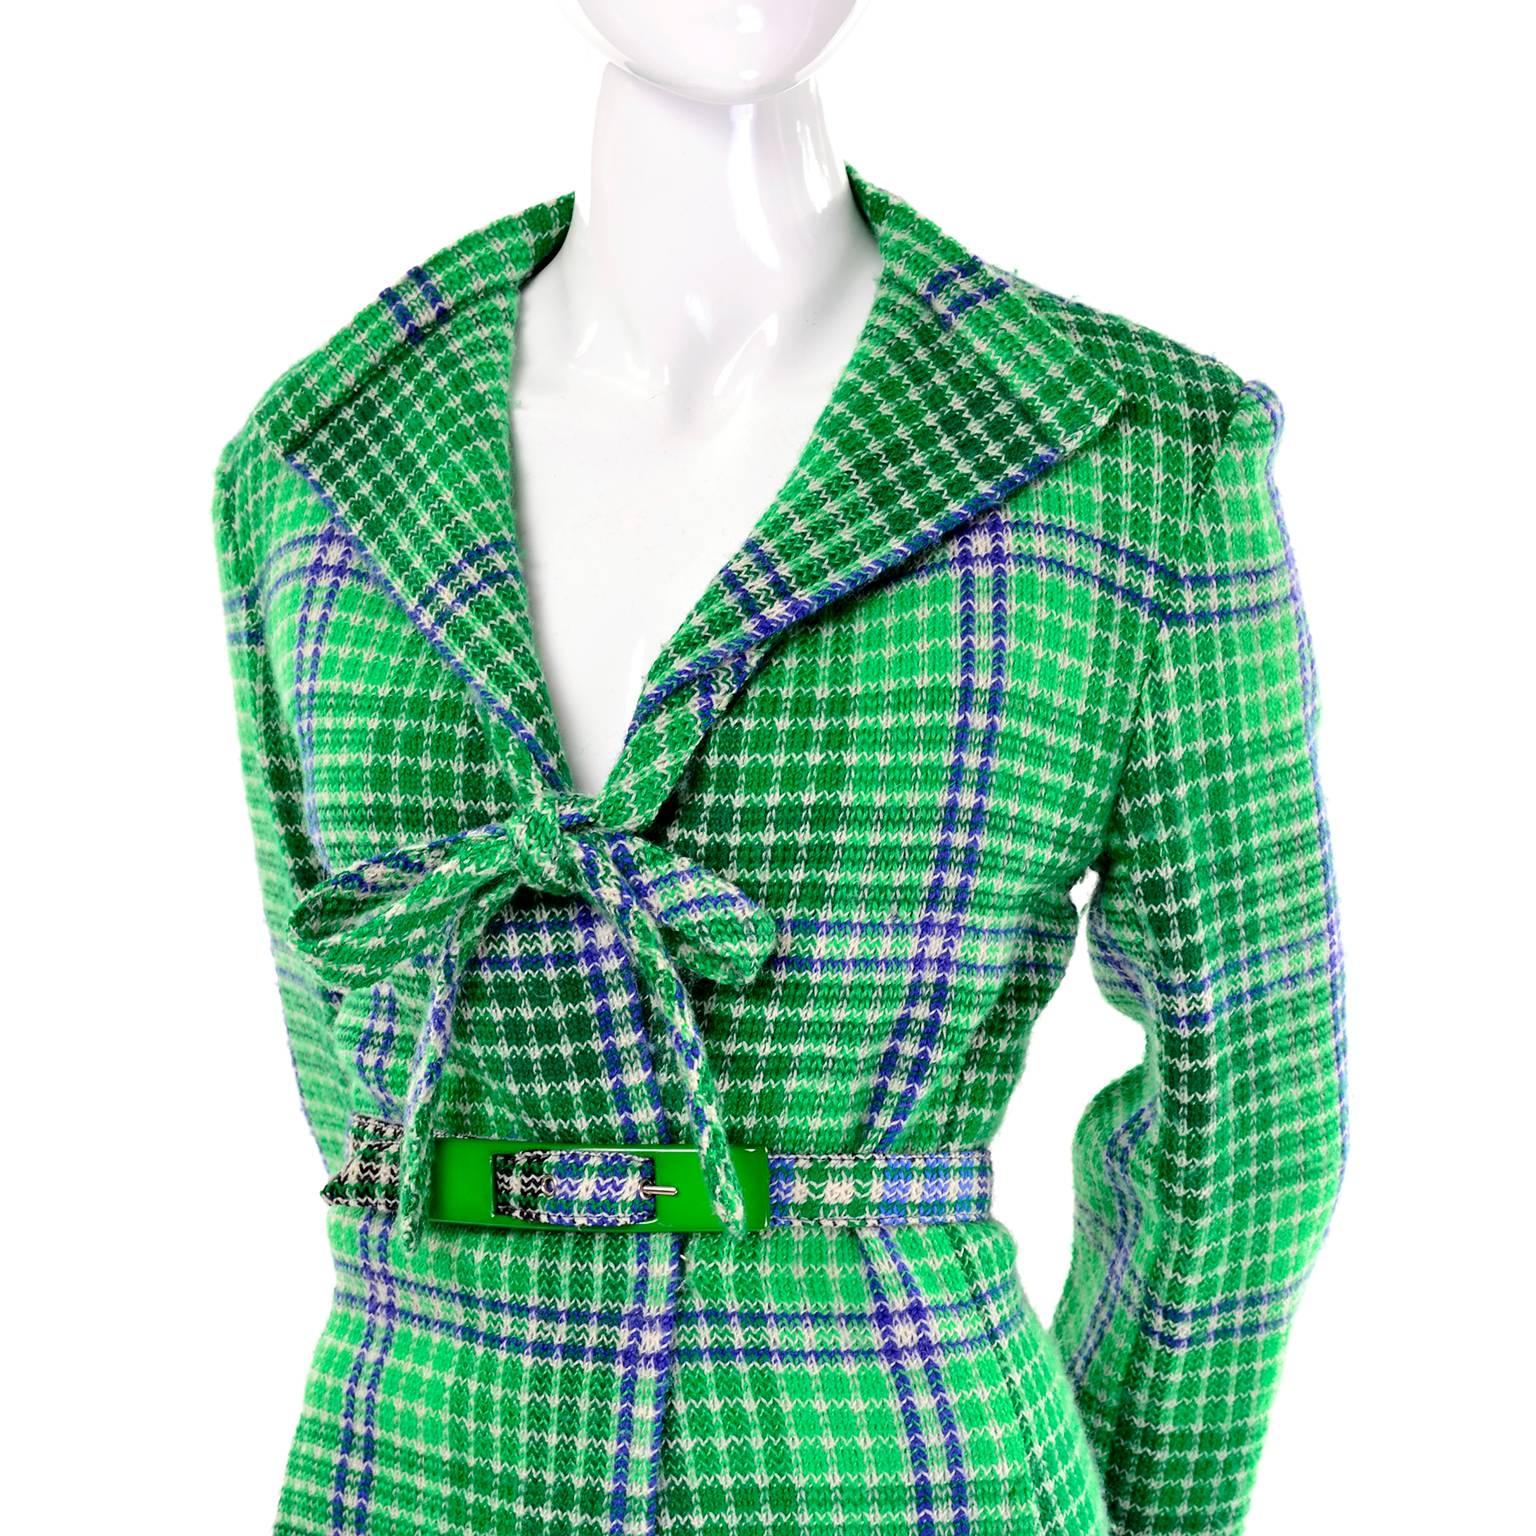 This is a rare 1970's vintage skirt suit from Missoni.  The suit includes a jacket that closes with a single hook with a fabric tie at the neck and a belt with a great buckle and a skirt with an elastic waist that slips overhead.  Both pieces are